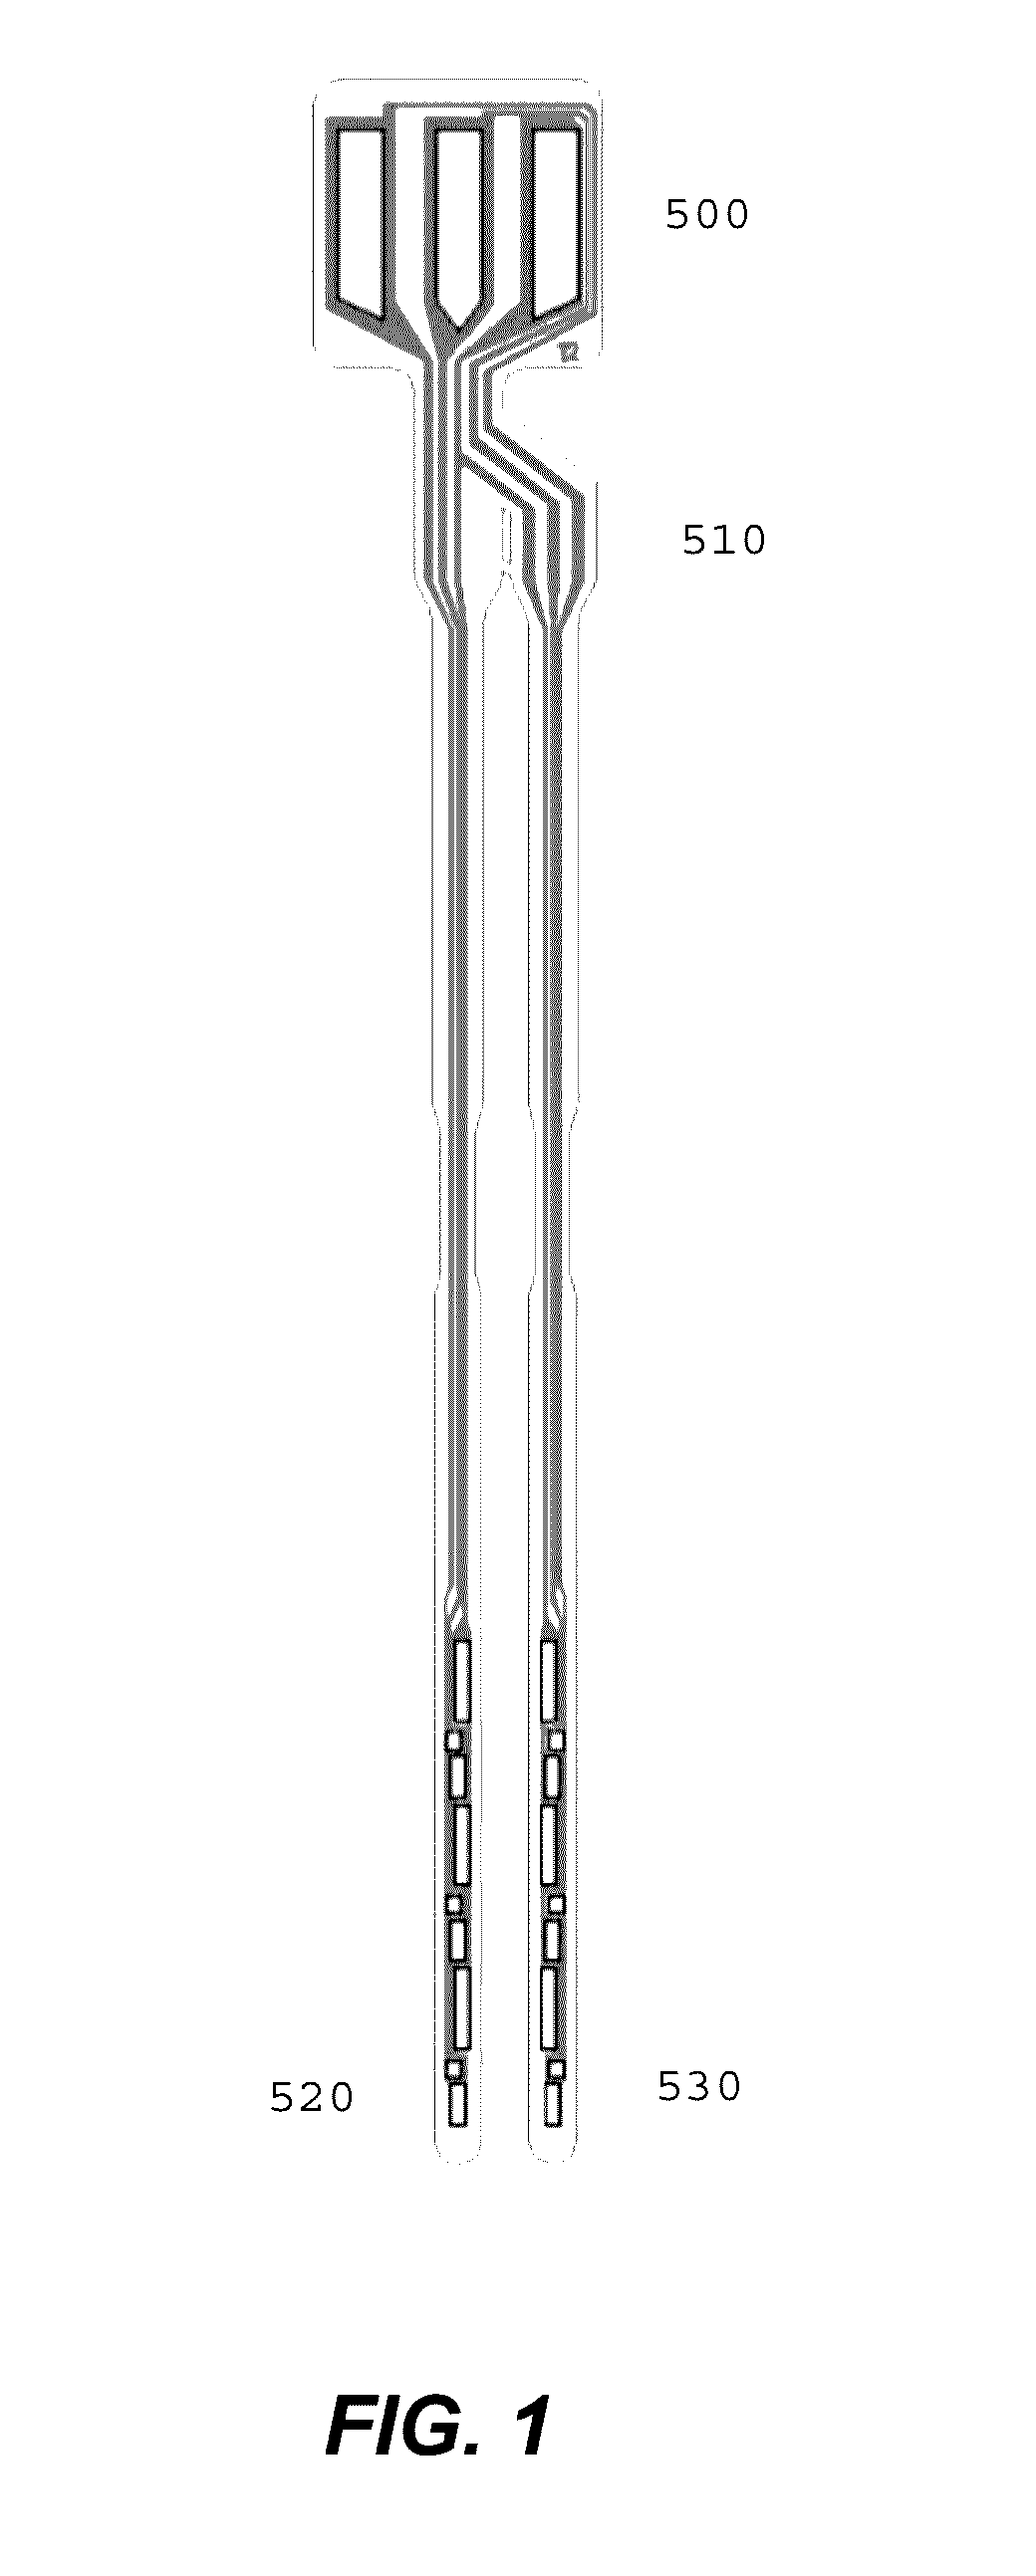 Foldover sensors and methods for making and using them